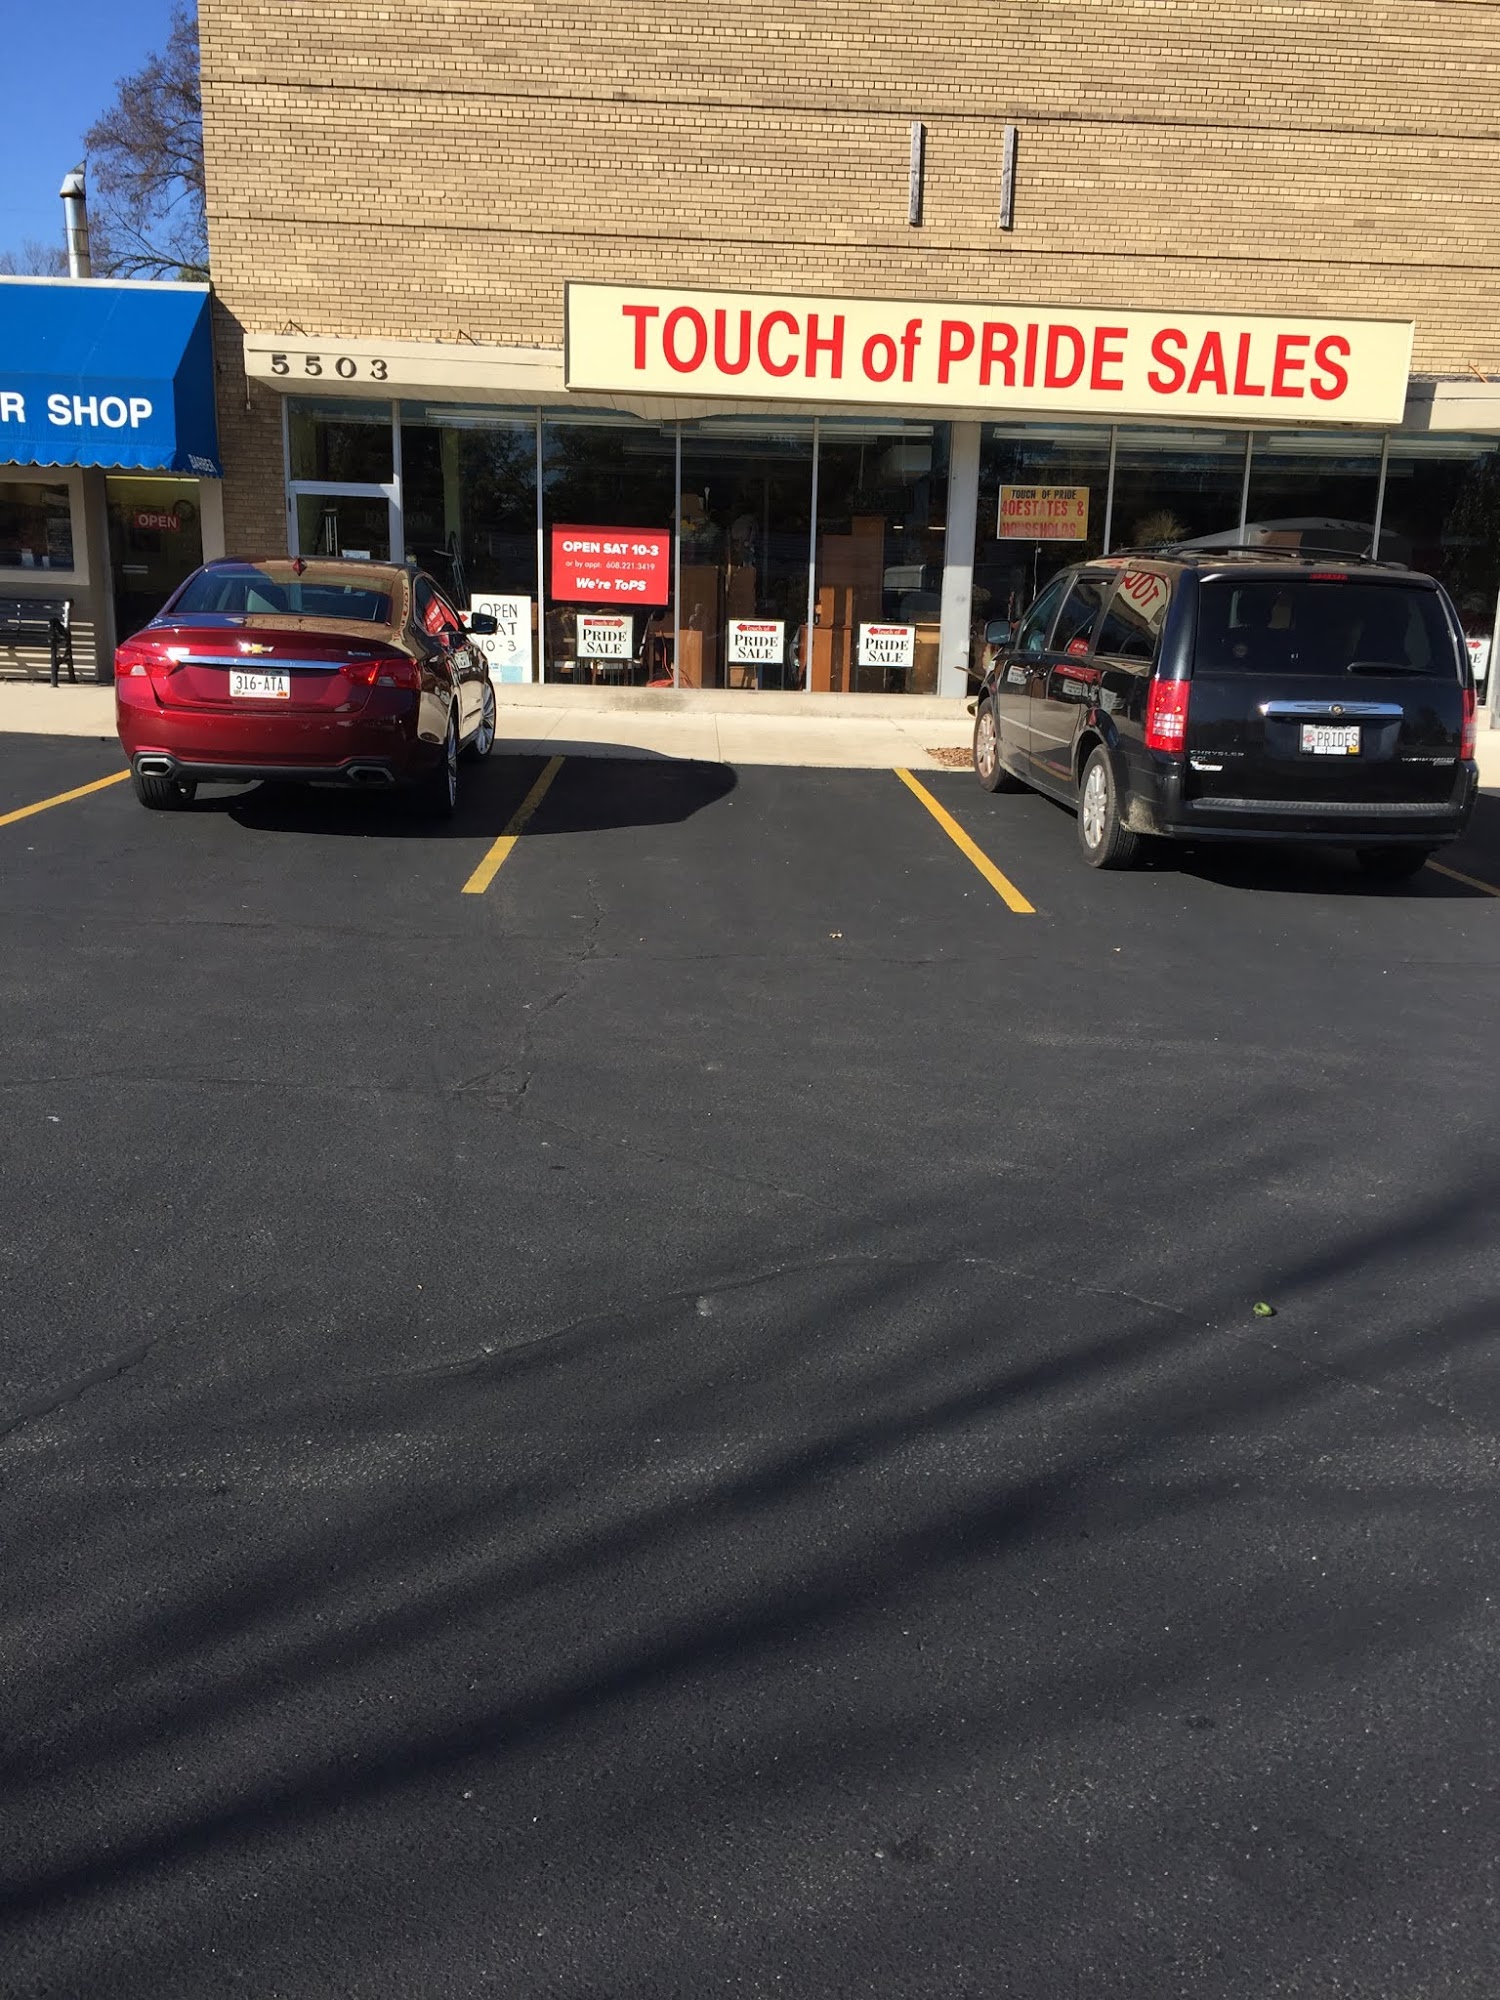 Touch of Pride Sales LLC